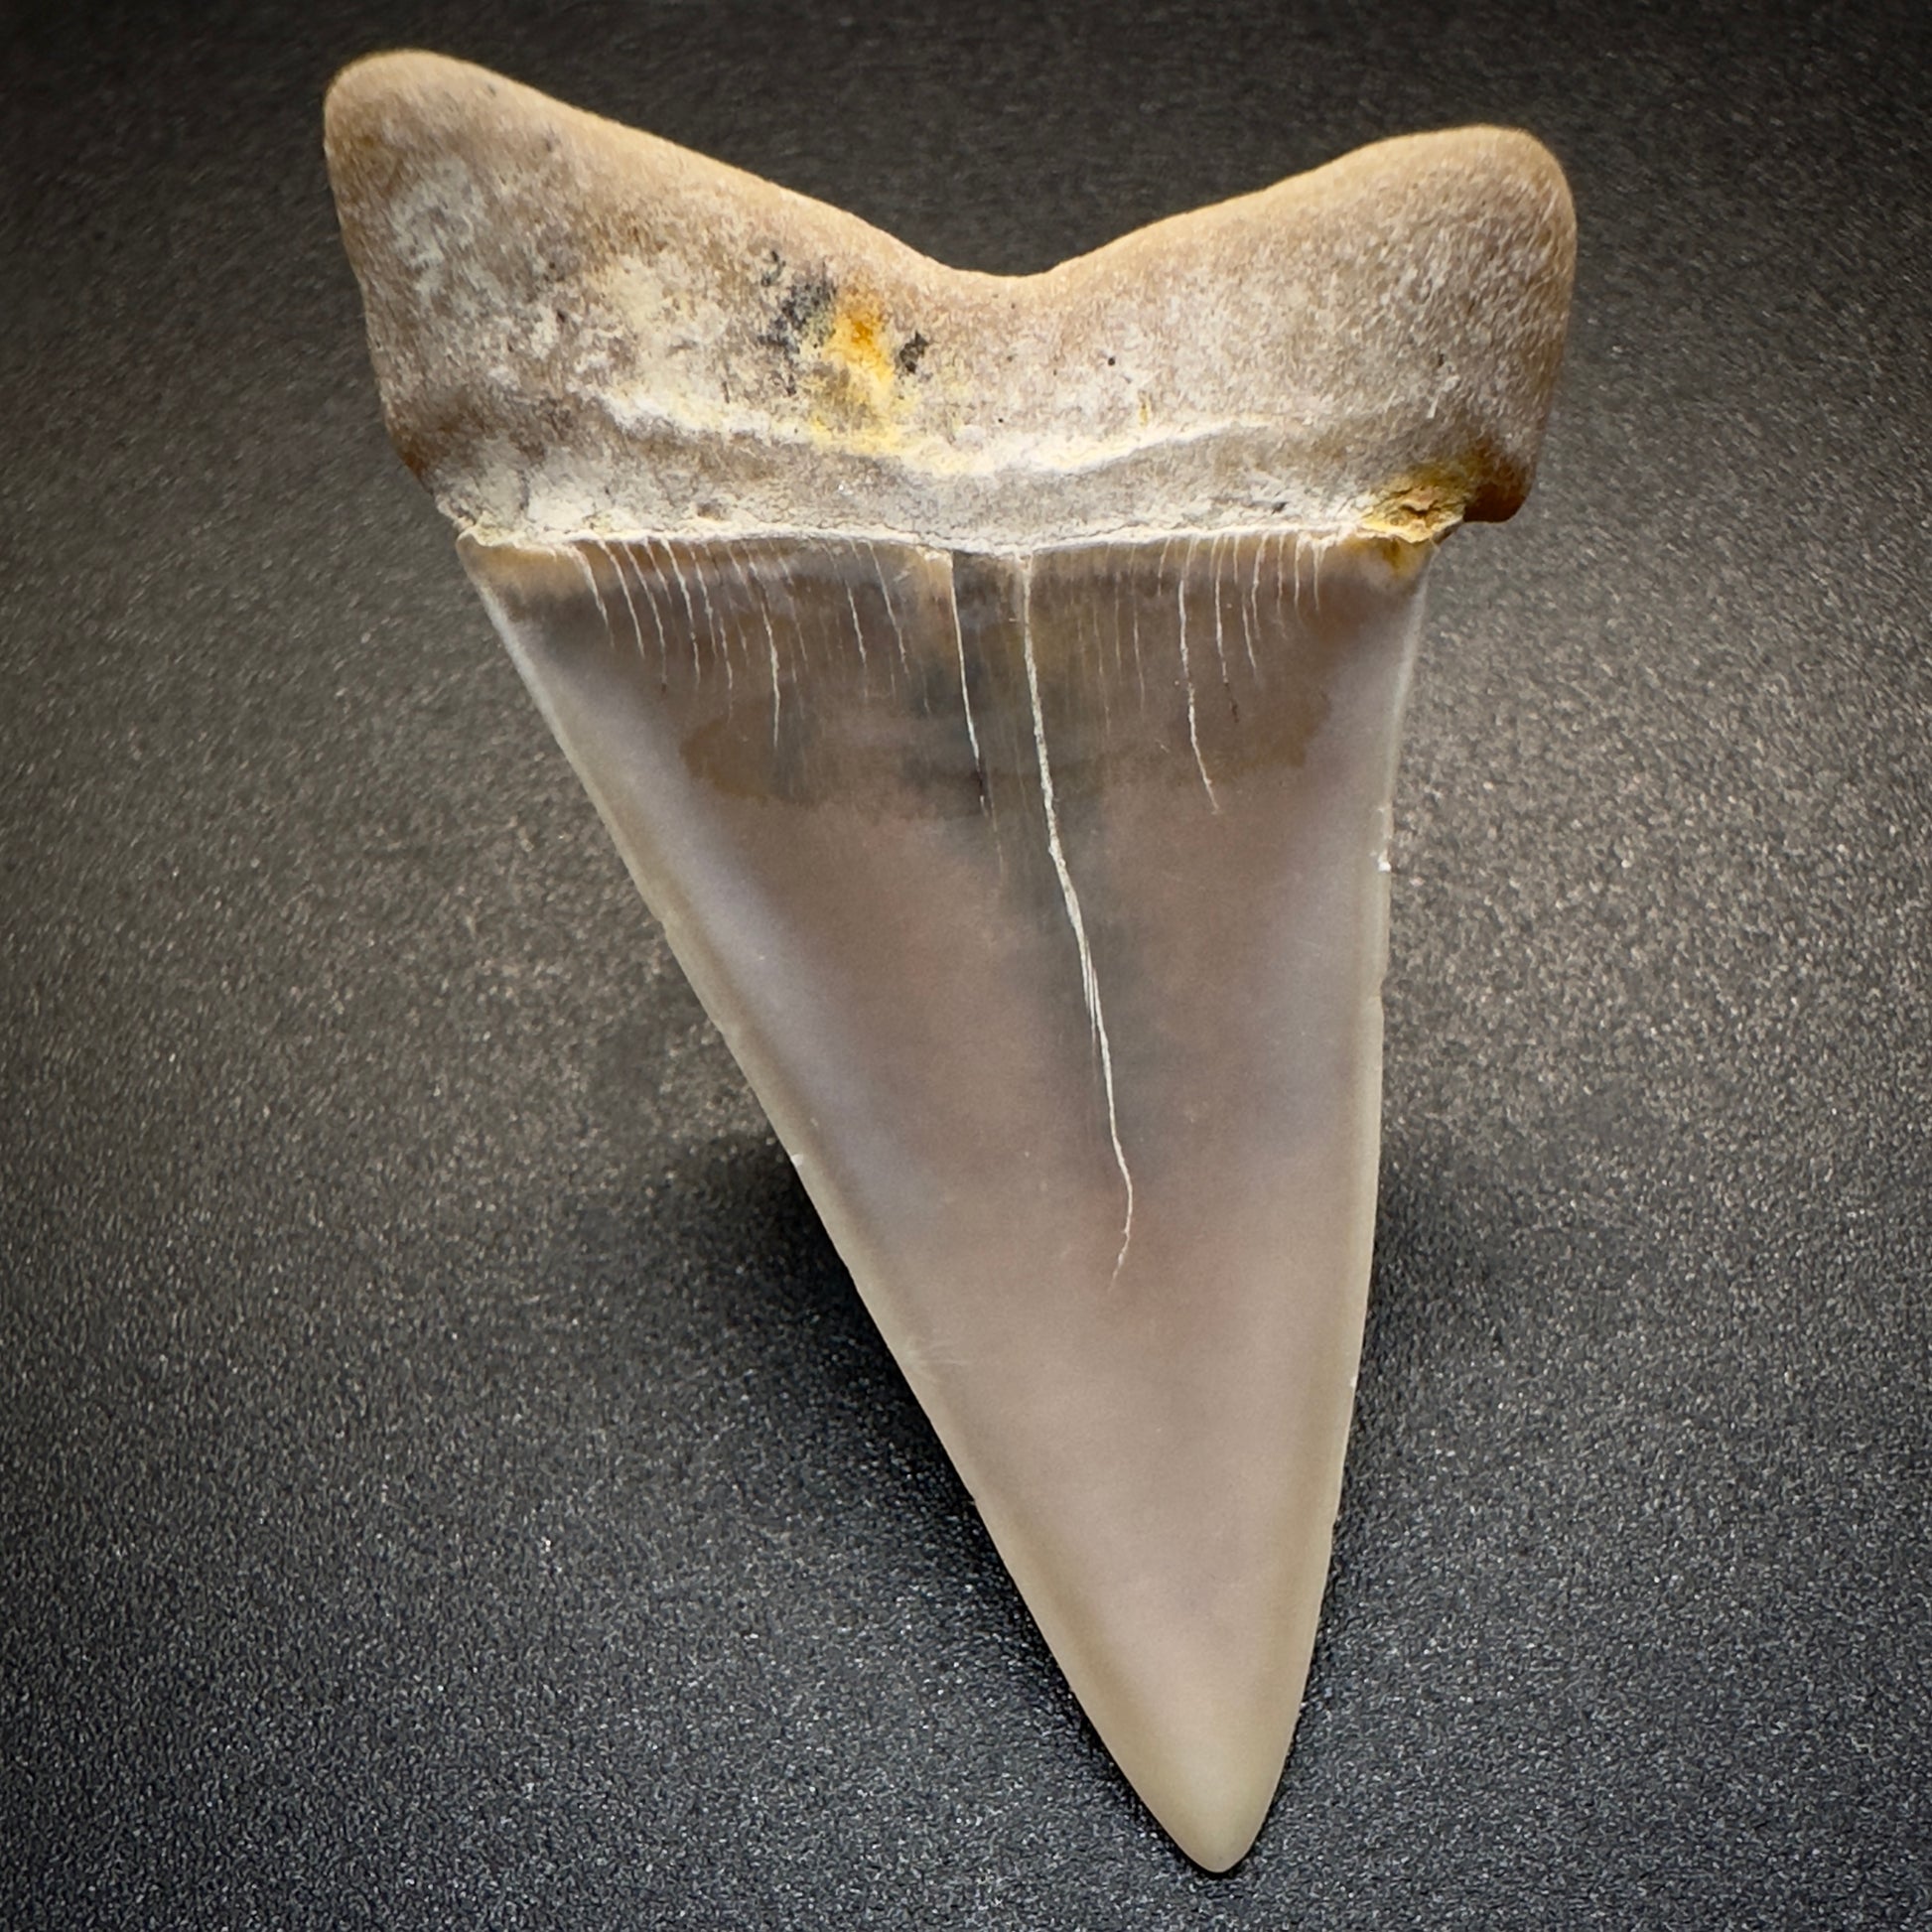 1.95 inches Colorful Extinct Mako - Isurus hastalis shark tooth from Bakersfield, California M501 back down